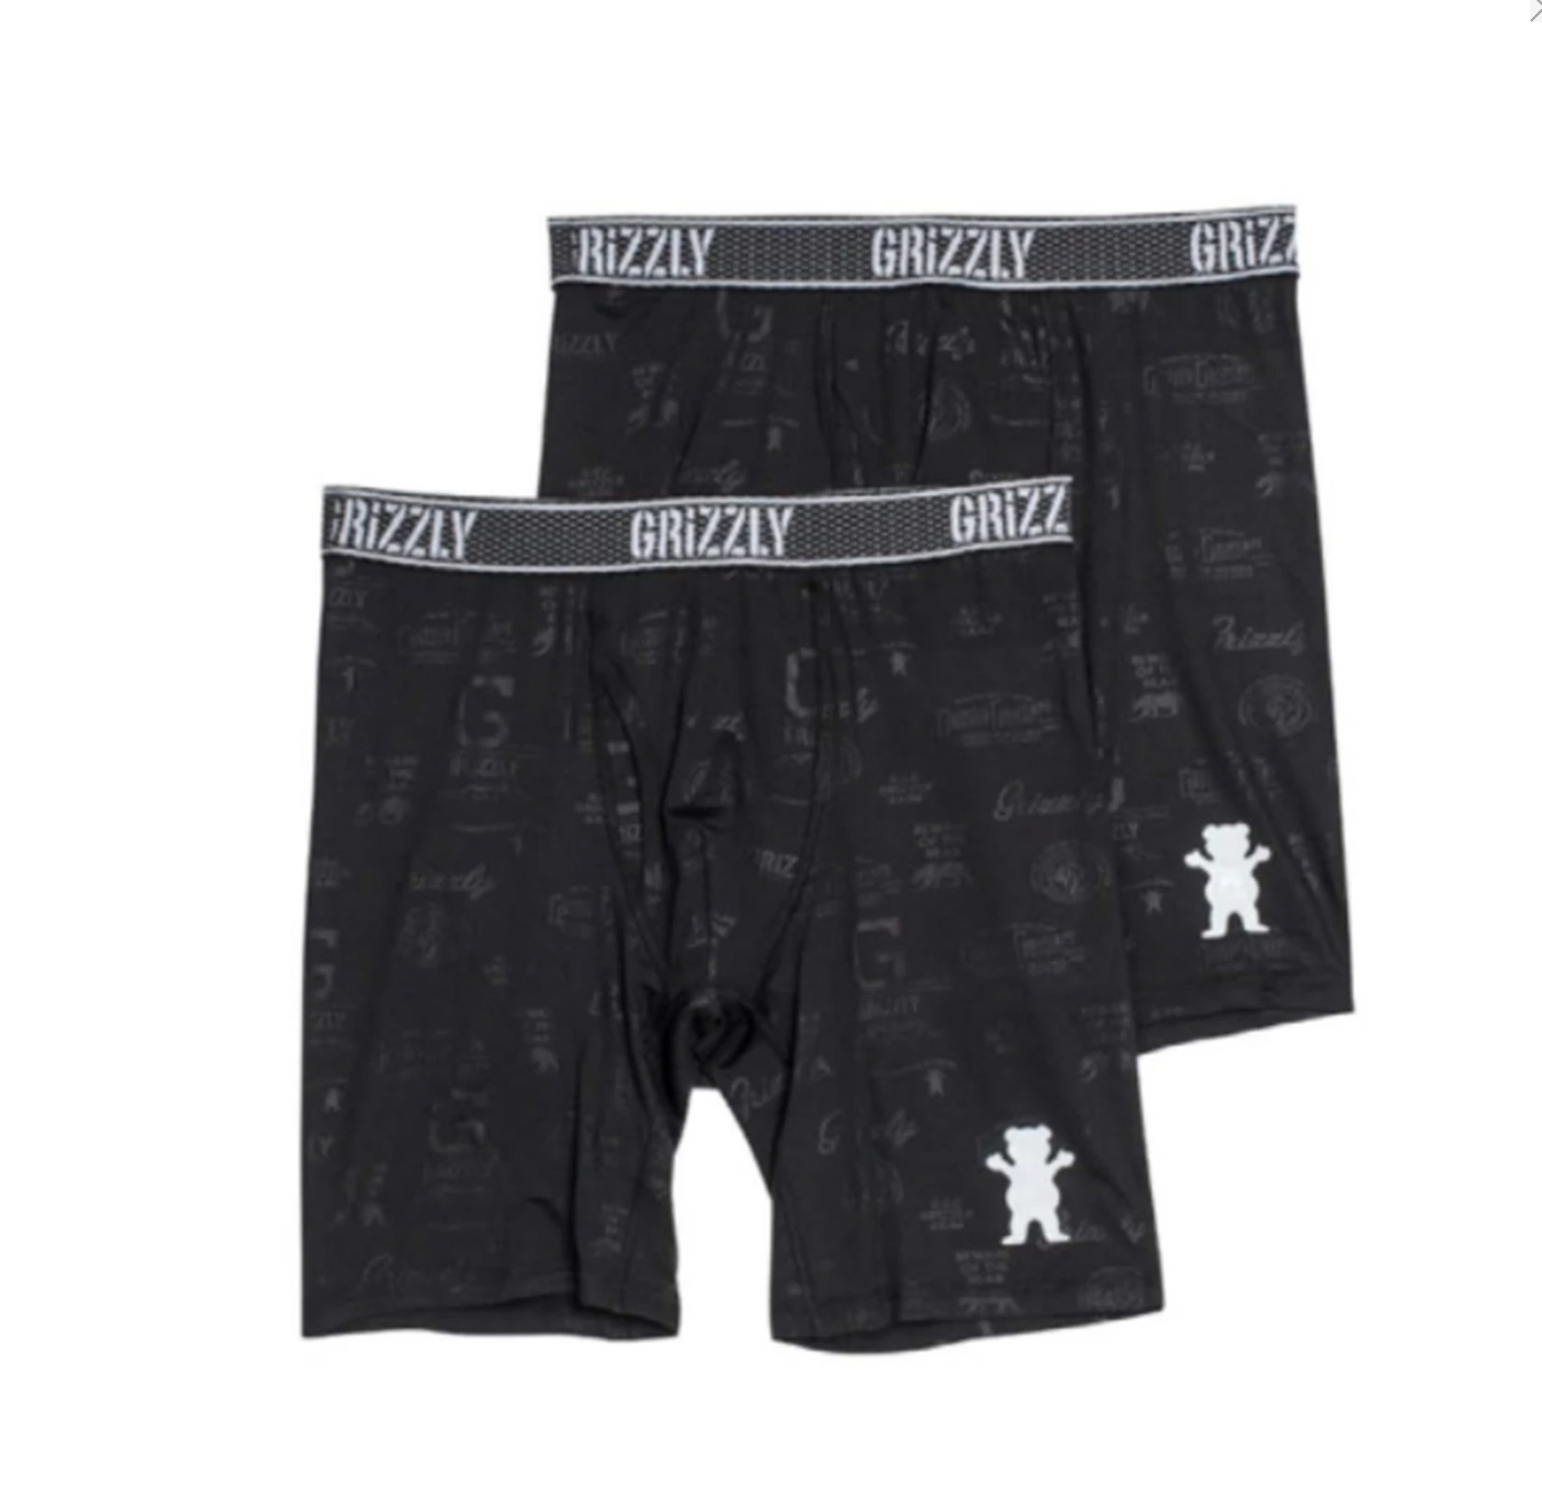 PERFORMANCE BOXER 2 PACK GRIZZLY